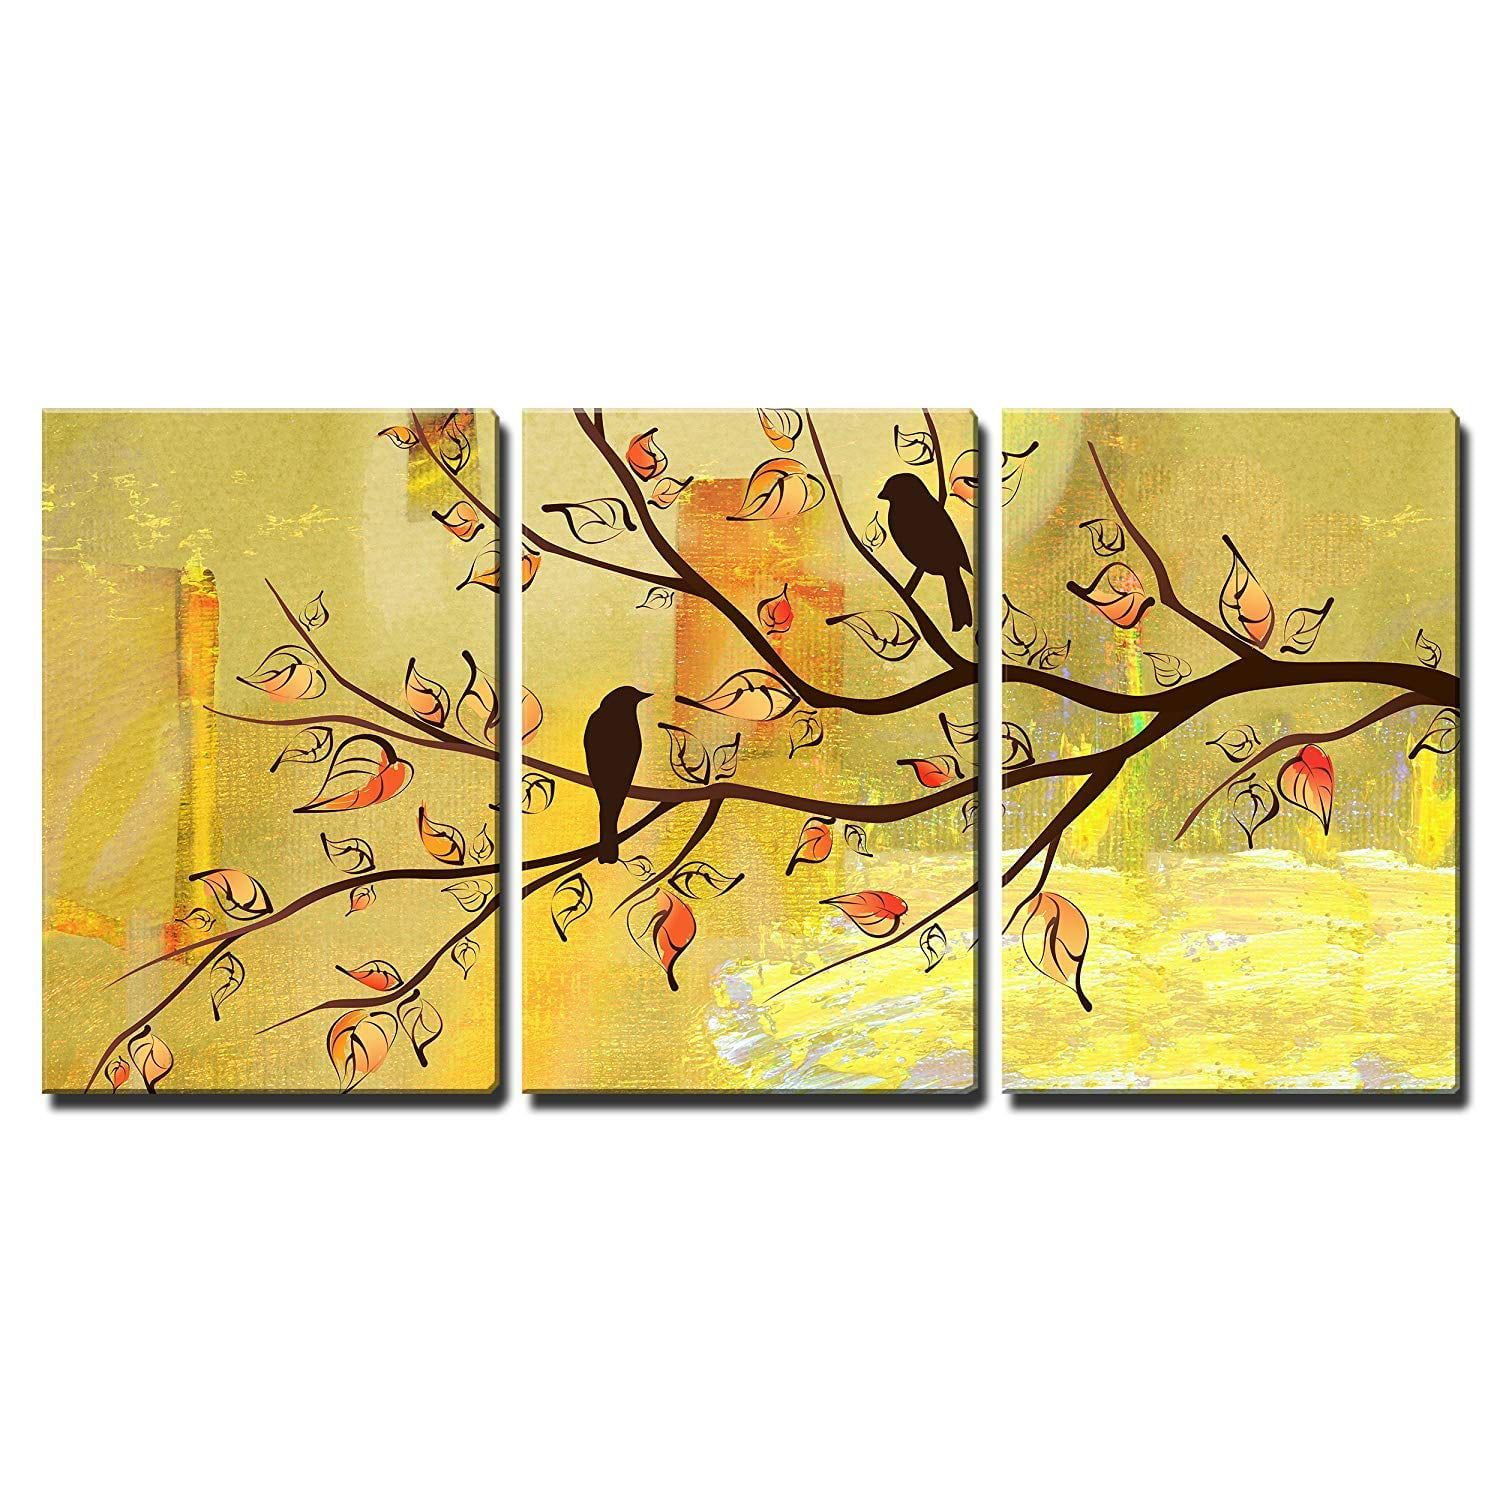 Wall26 3 Piece Canvas Wall Art – Two Birds On Tree Branches On Vintage  Yellow Background – Modern Home Decor Stretched And Framed Ready To Hang –  24"x36"x3 Panels – Walmart With Regard To Most Current Bird On Tree Branch Wall Art (Gallery 20 of 20)